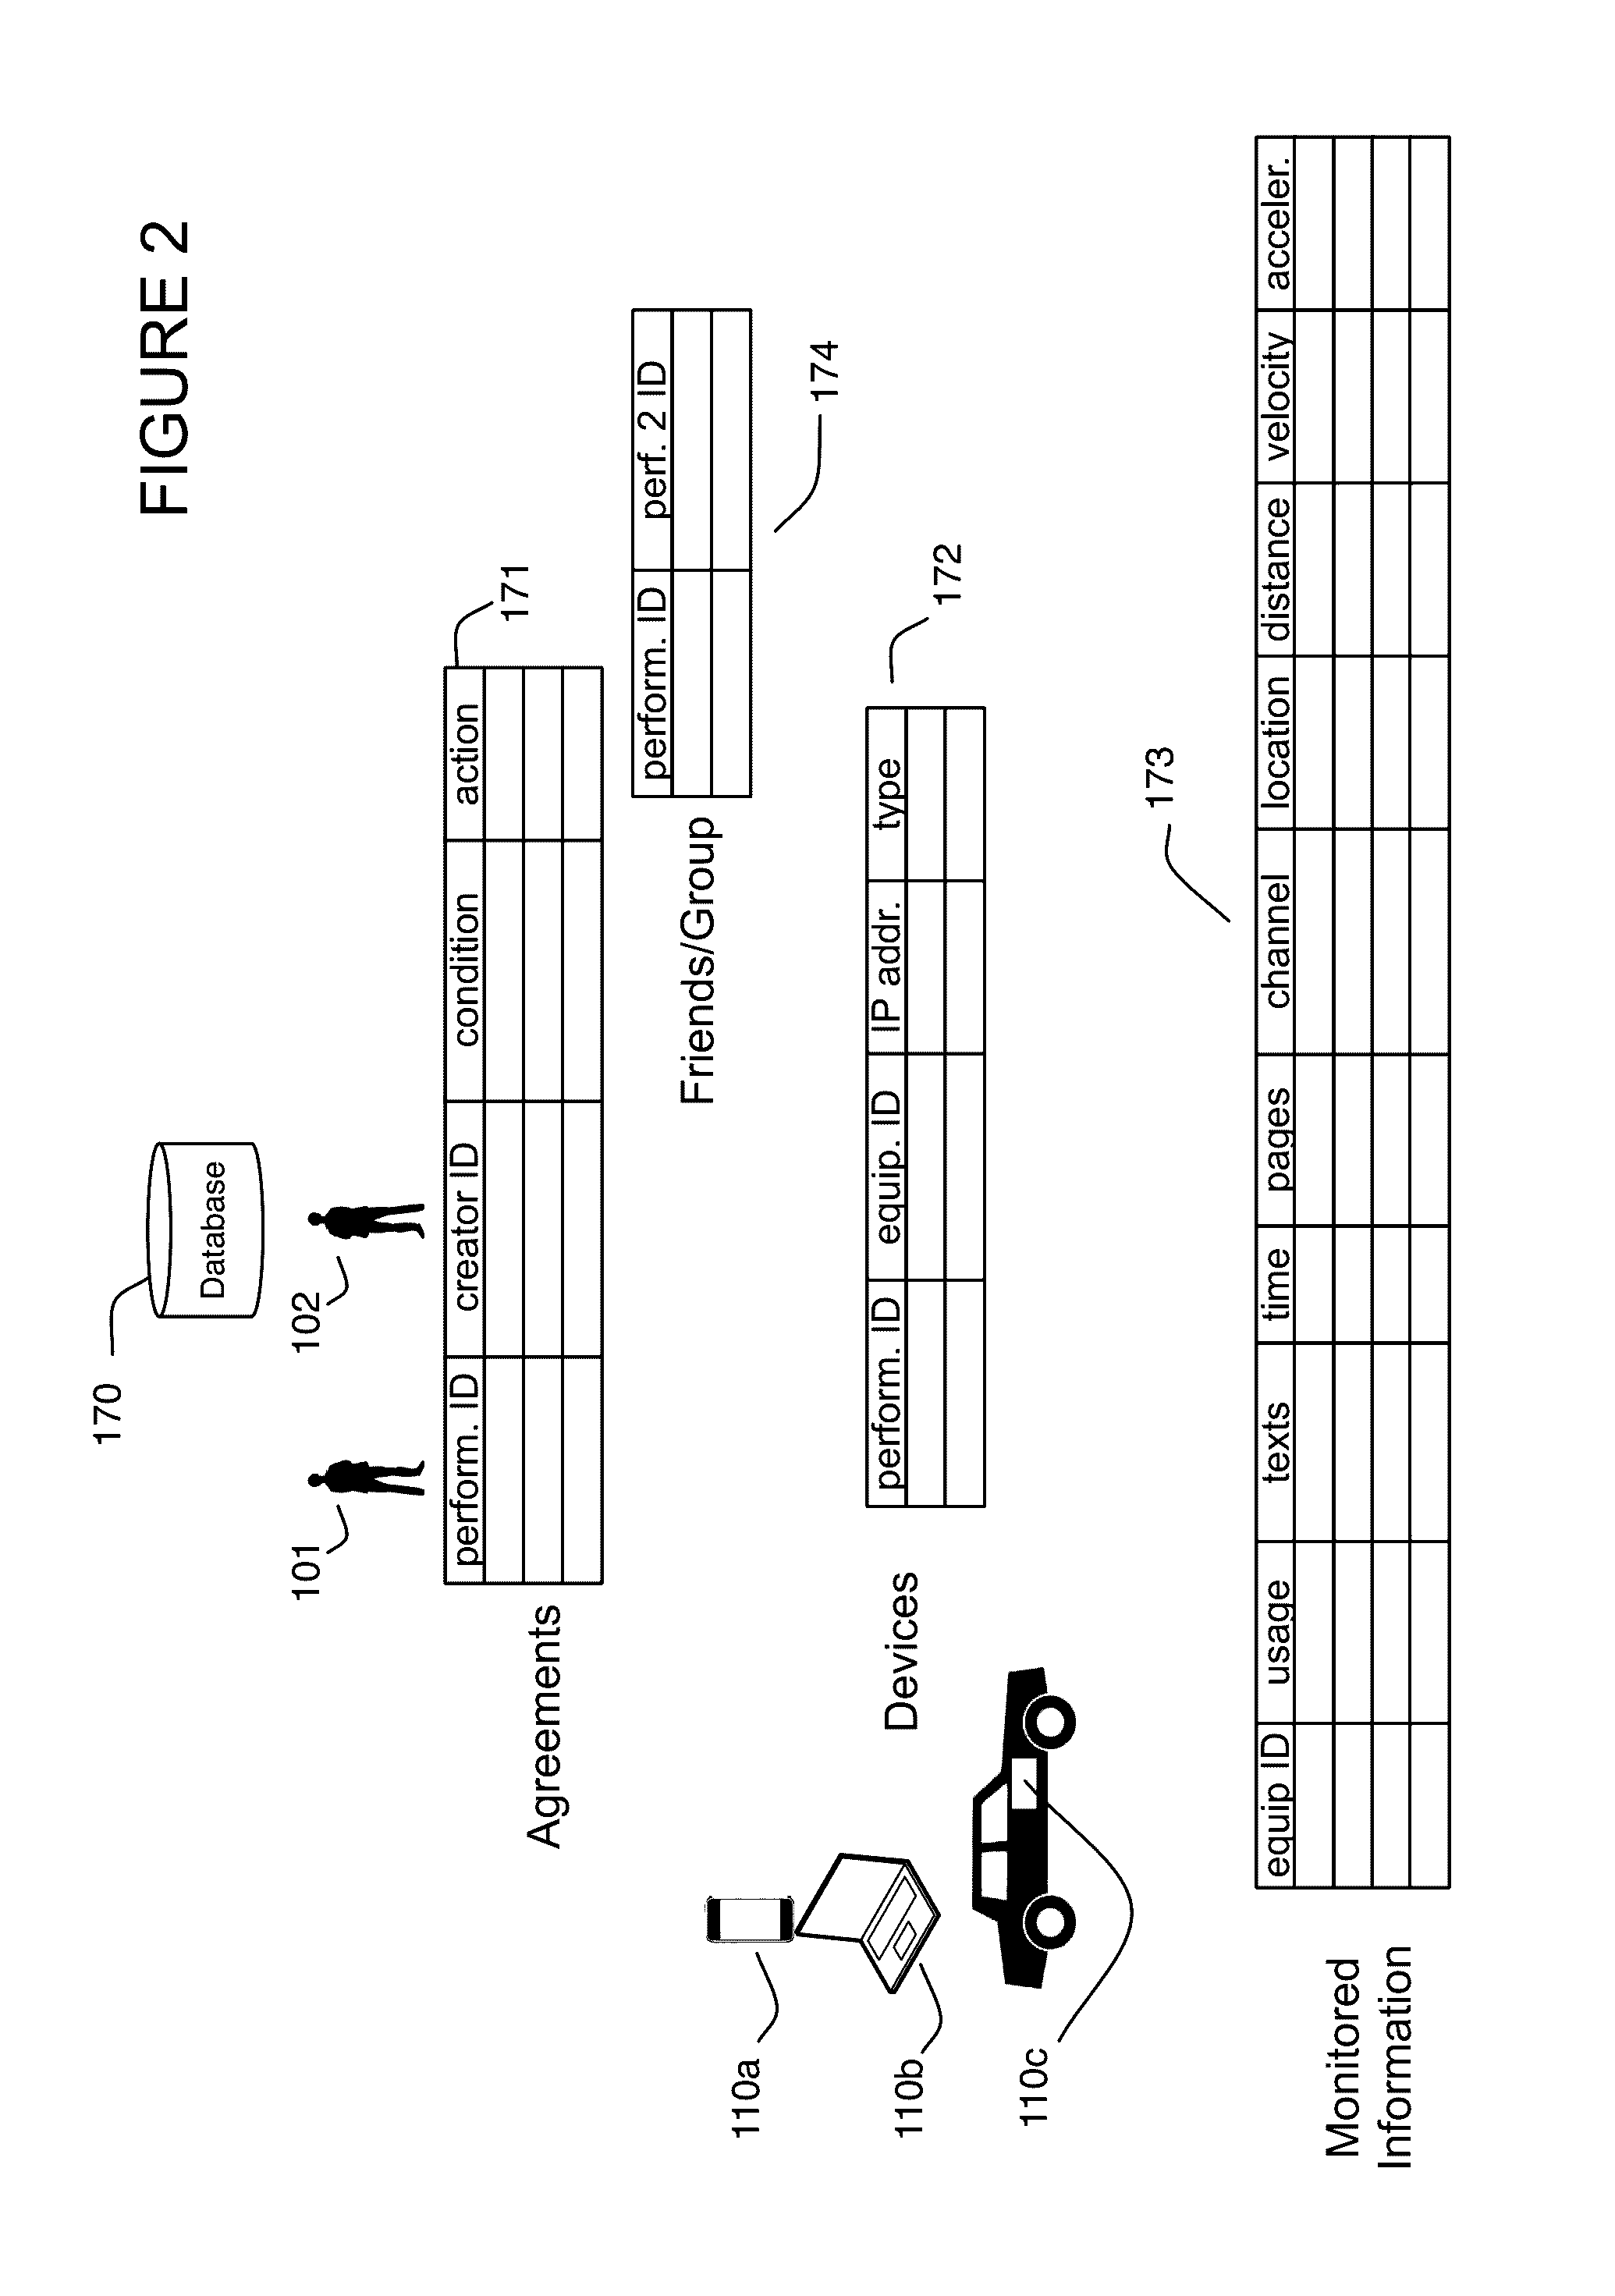 Partial information throttle based on compliance with an agreement